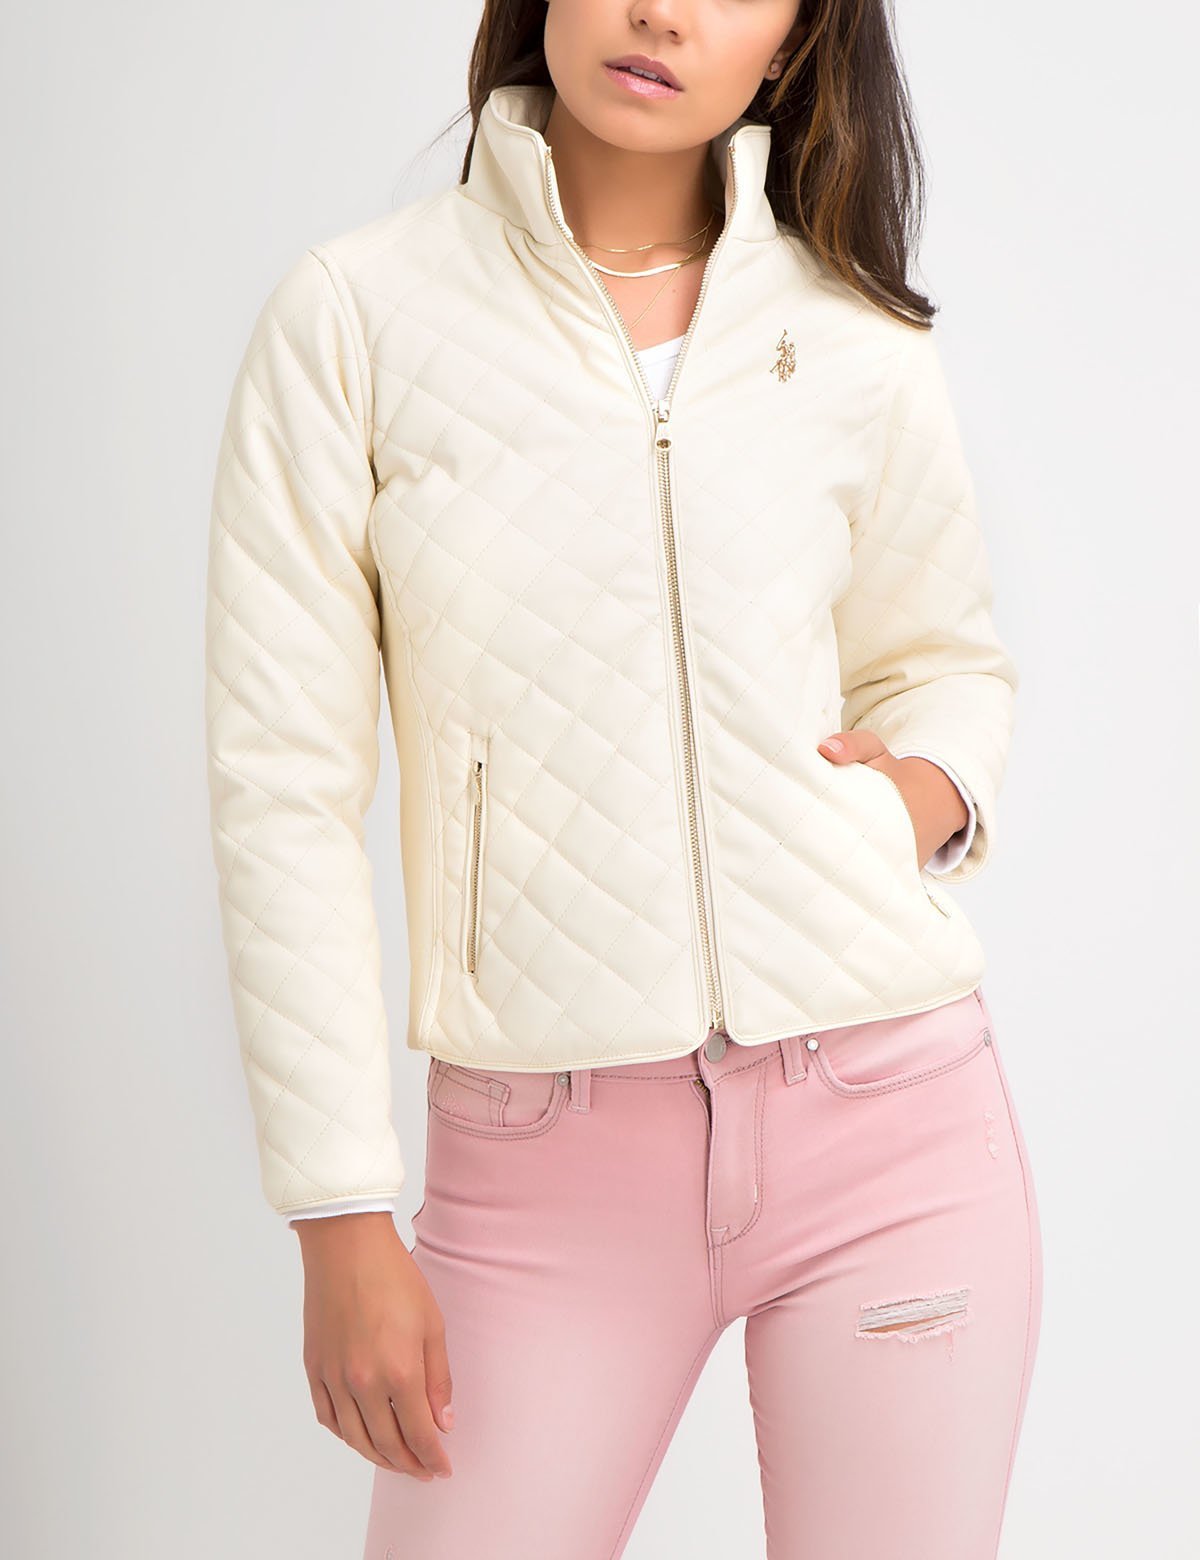 us polo quilted jacket